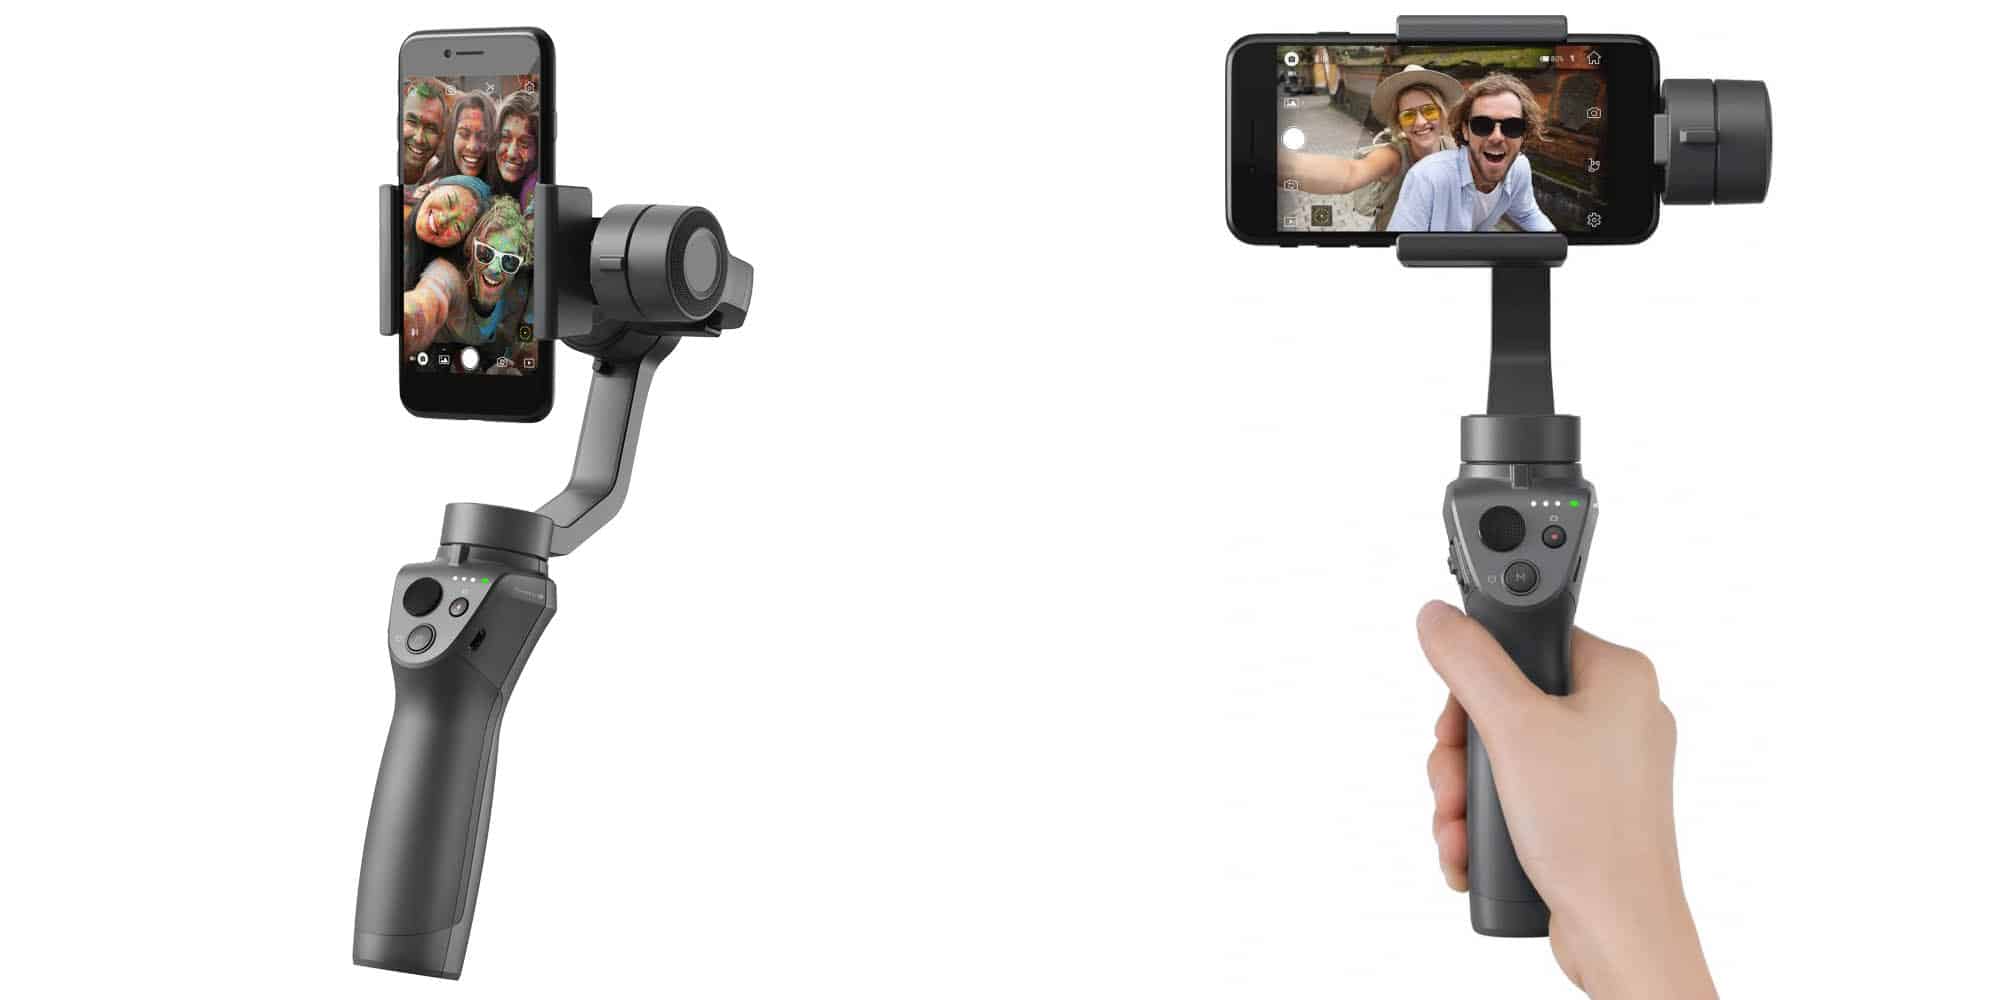 featured image for the dji osmo mobile 2 review